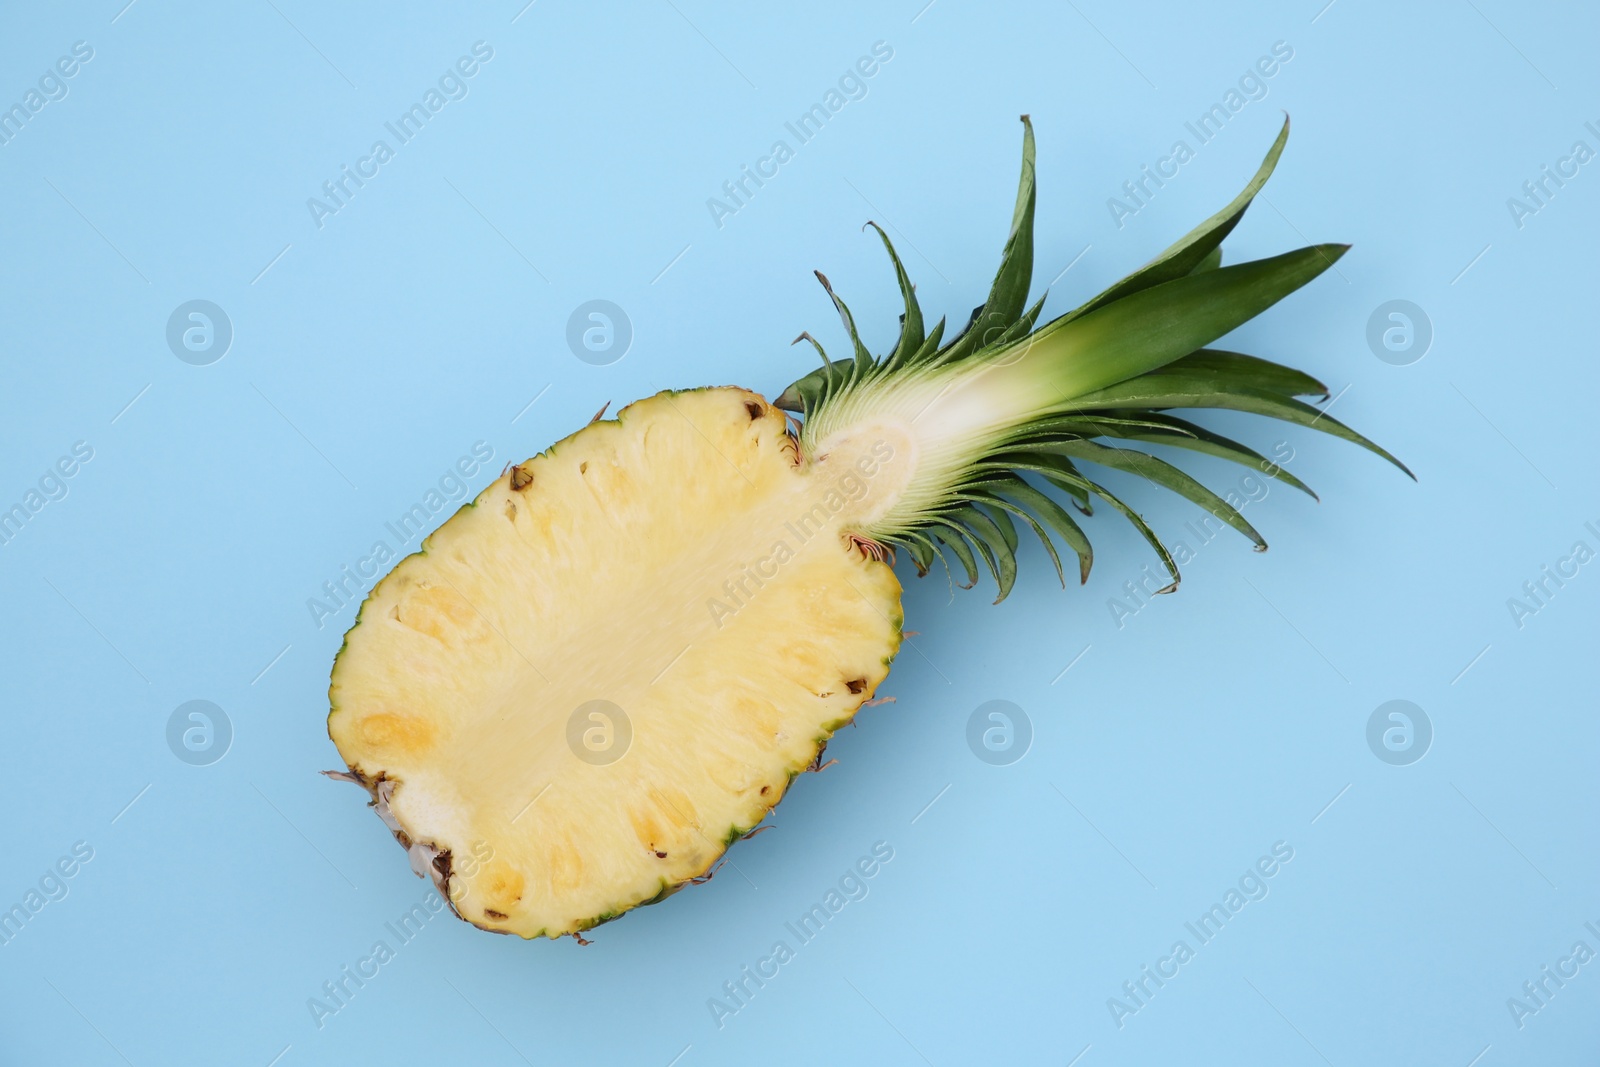 Photo of Half of ripe pineapple on light blue background, top view